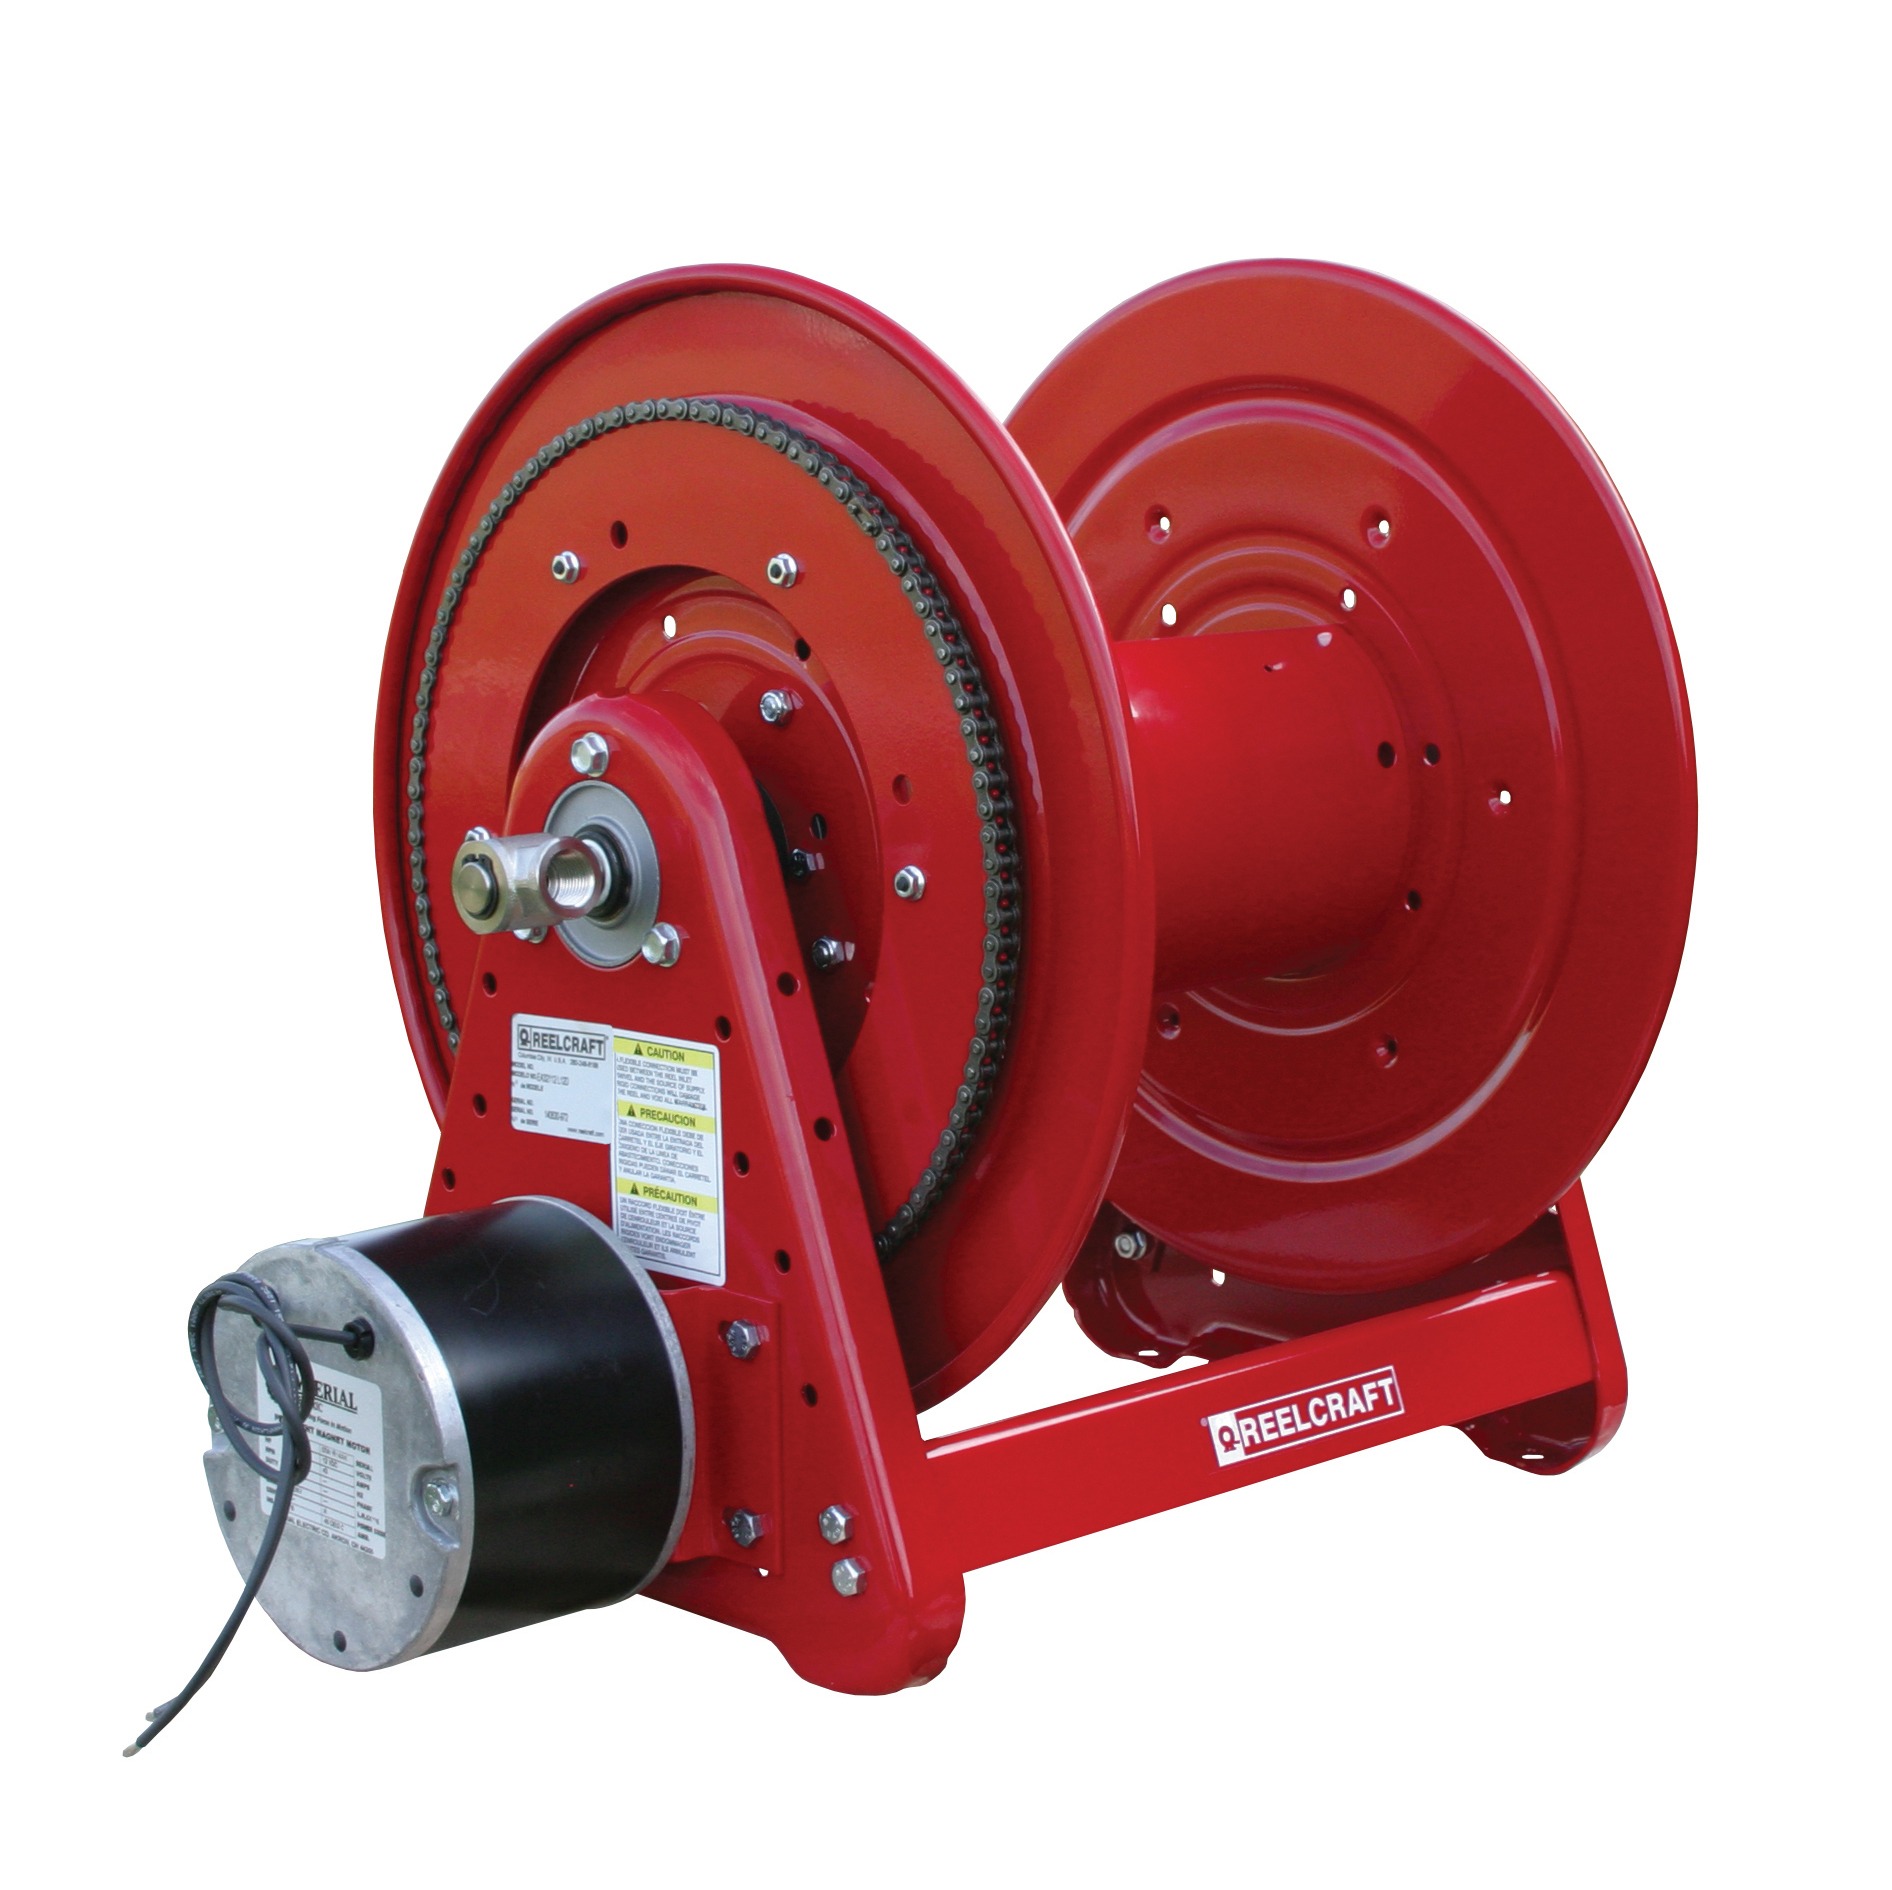 Coxreels P-W-135 Hose Reel Specifications